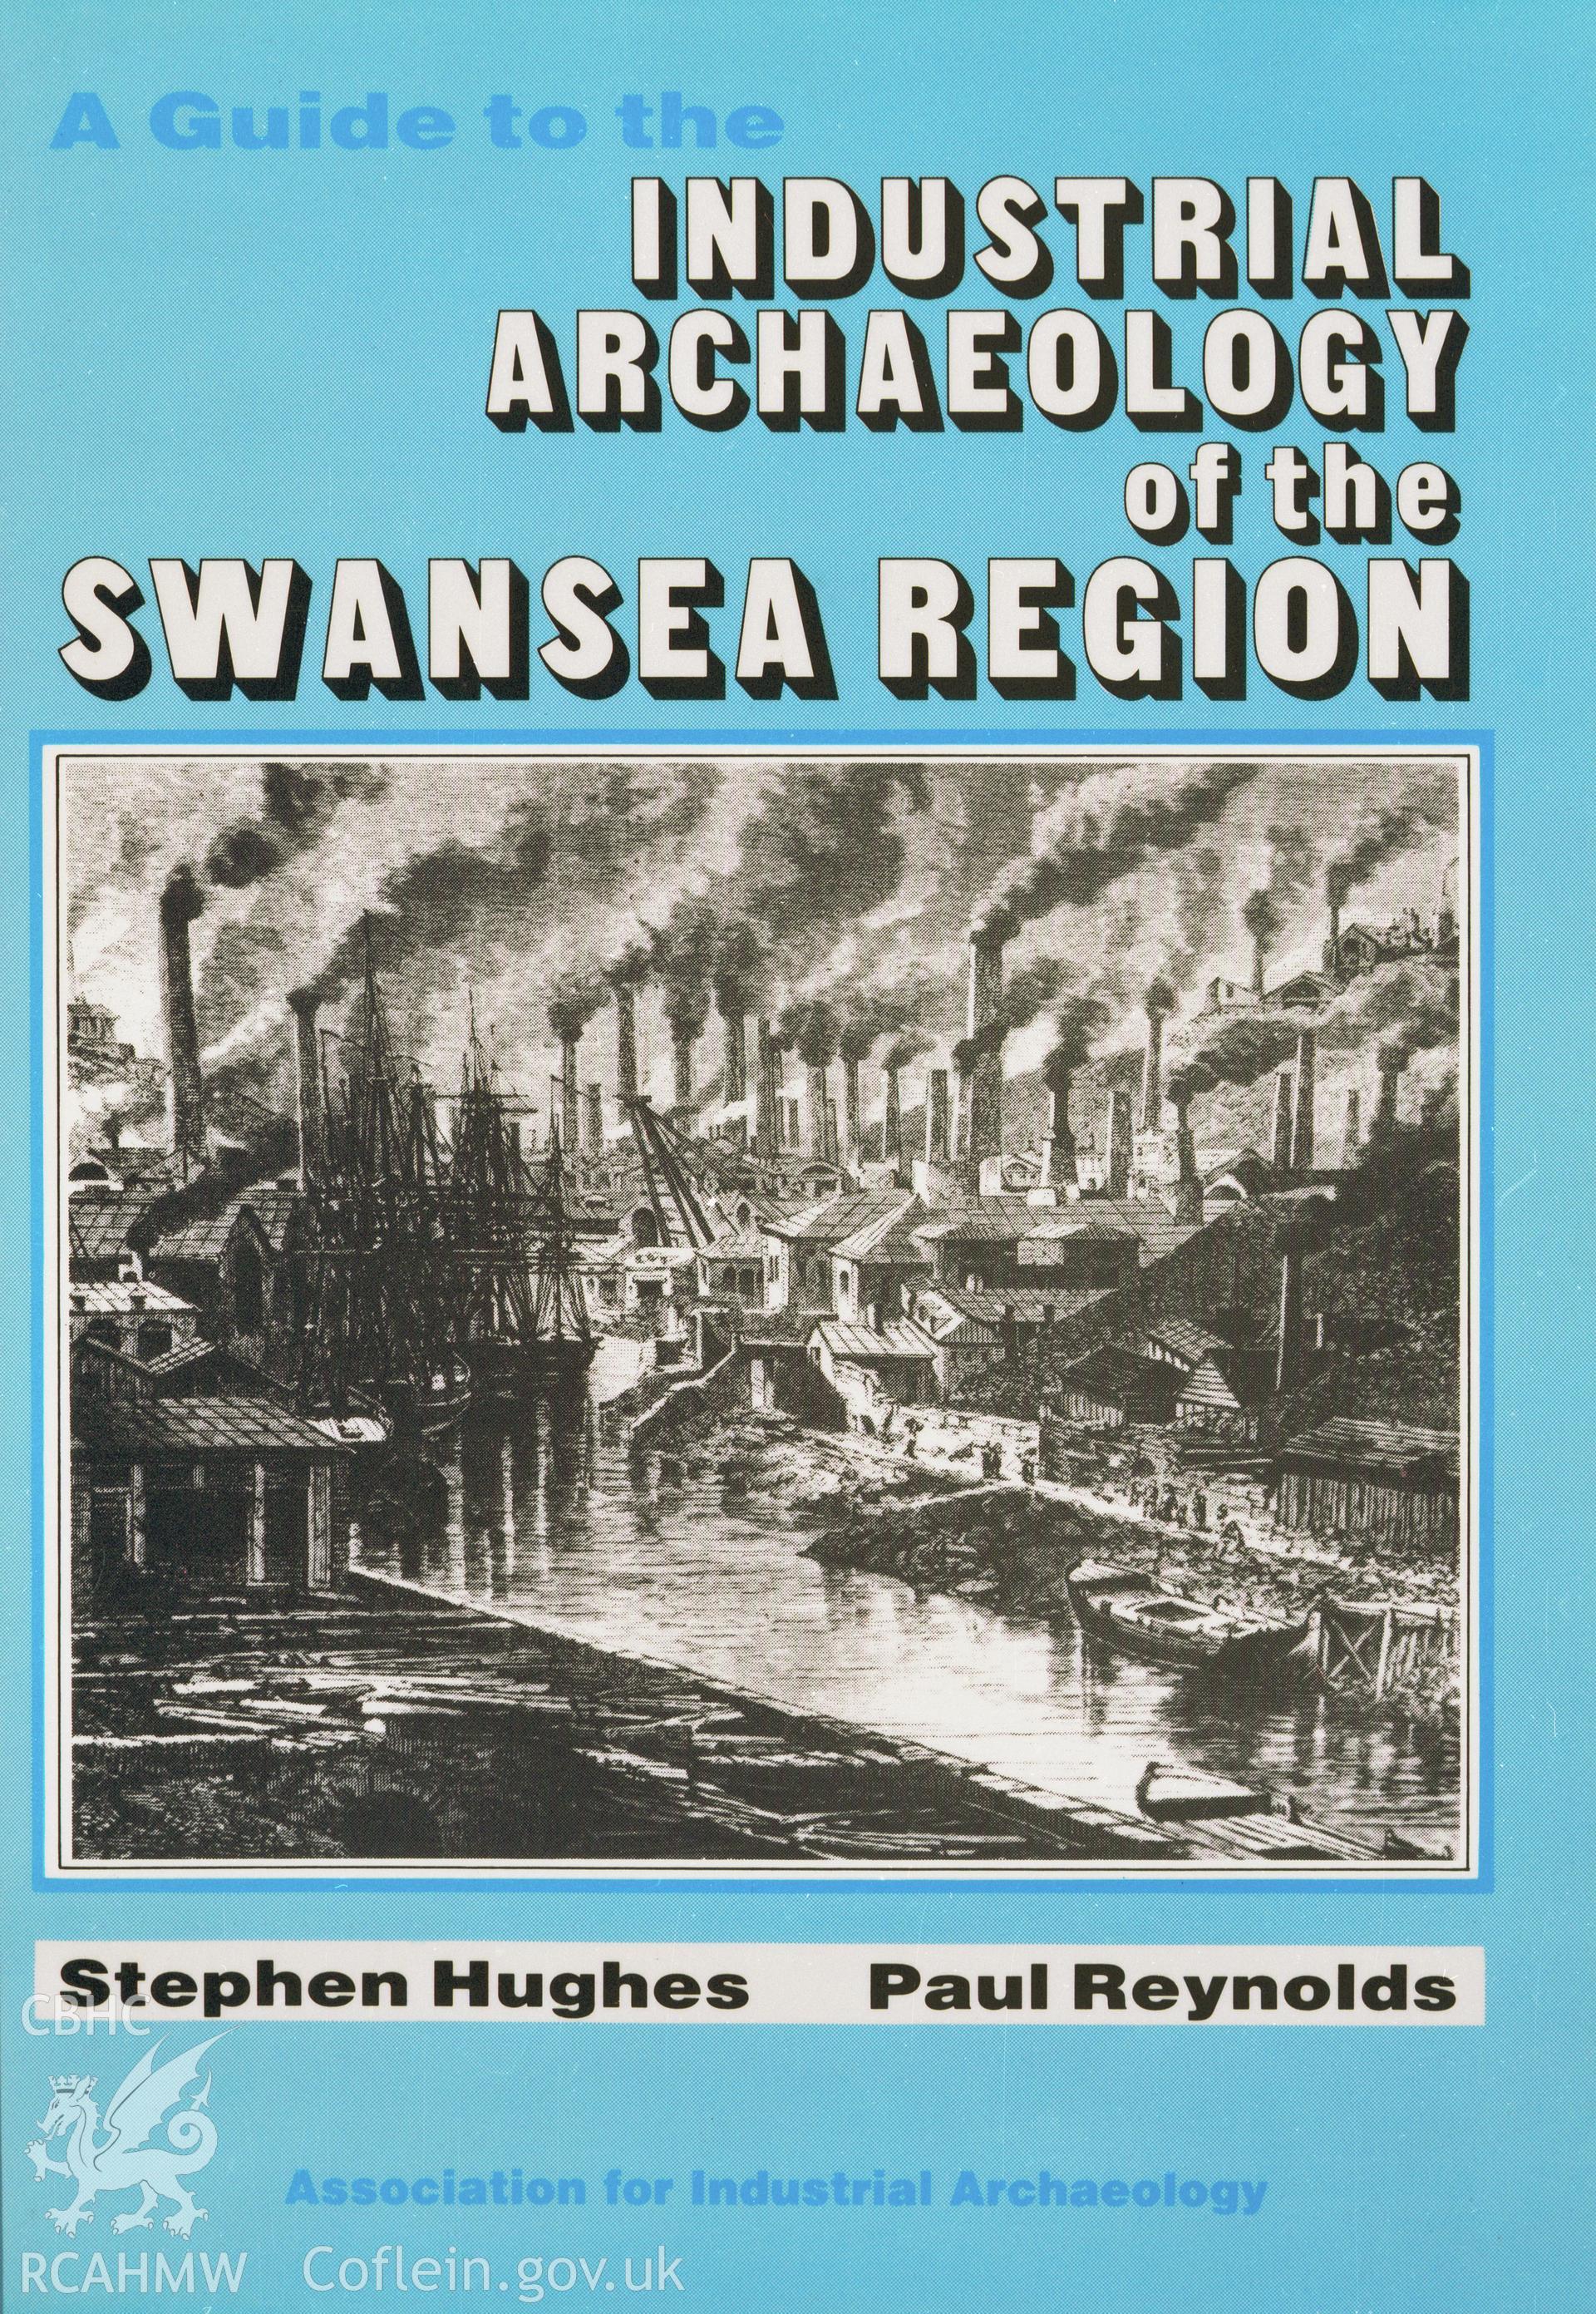 Colour transparency of the cover of the Association of Industrial Archaeologists publication,  A Guide to the Industrial Archaeology of the Swansea Region by Stephen Hughes and Paul Reynolds.